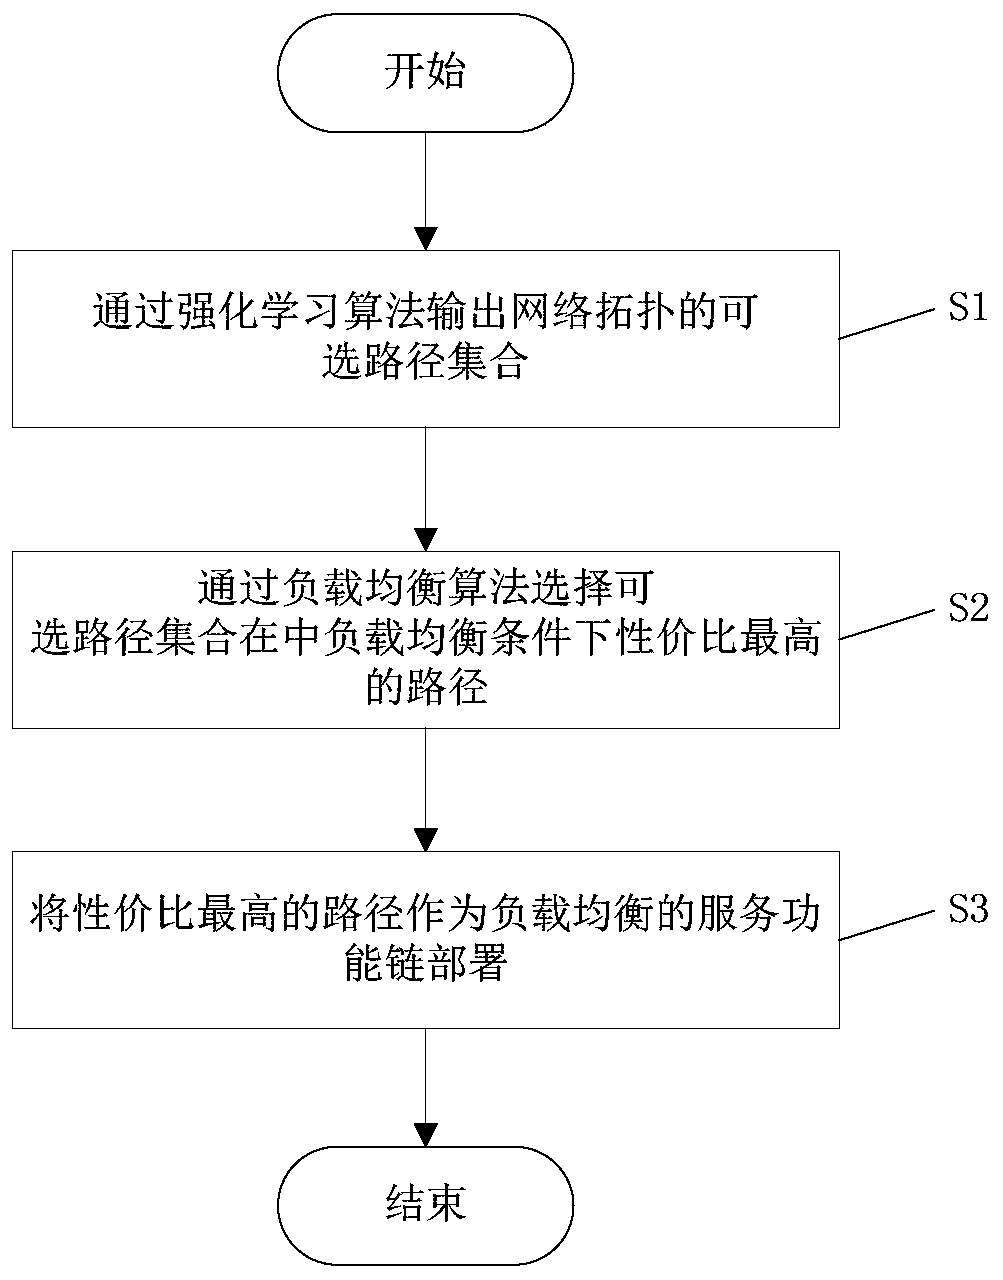 Fast and load-balanced service function chain deployment method in dynamic network environment